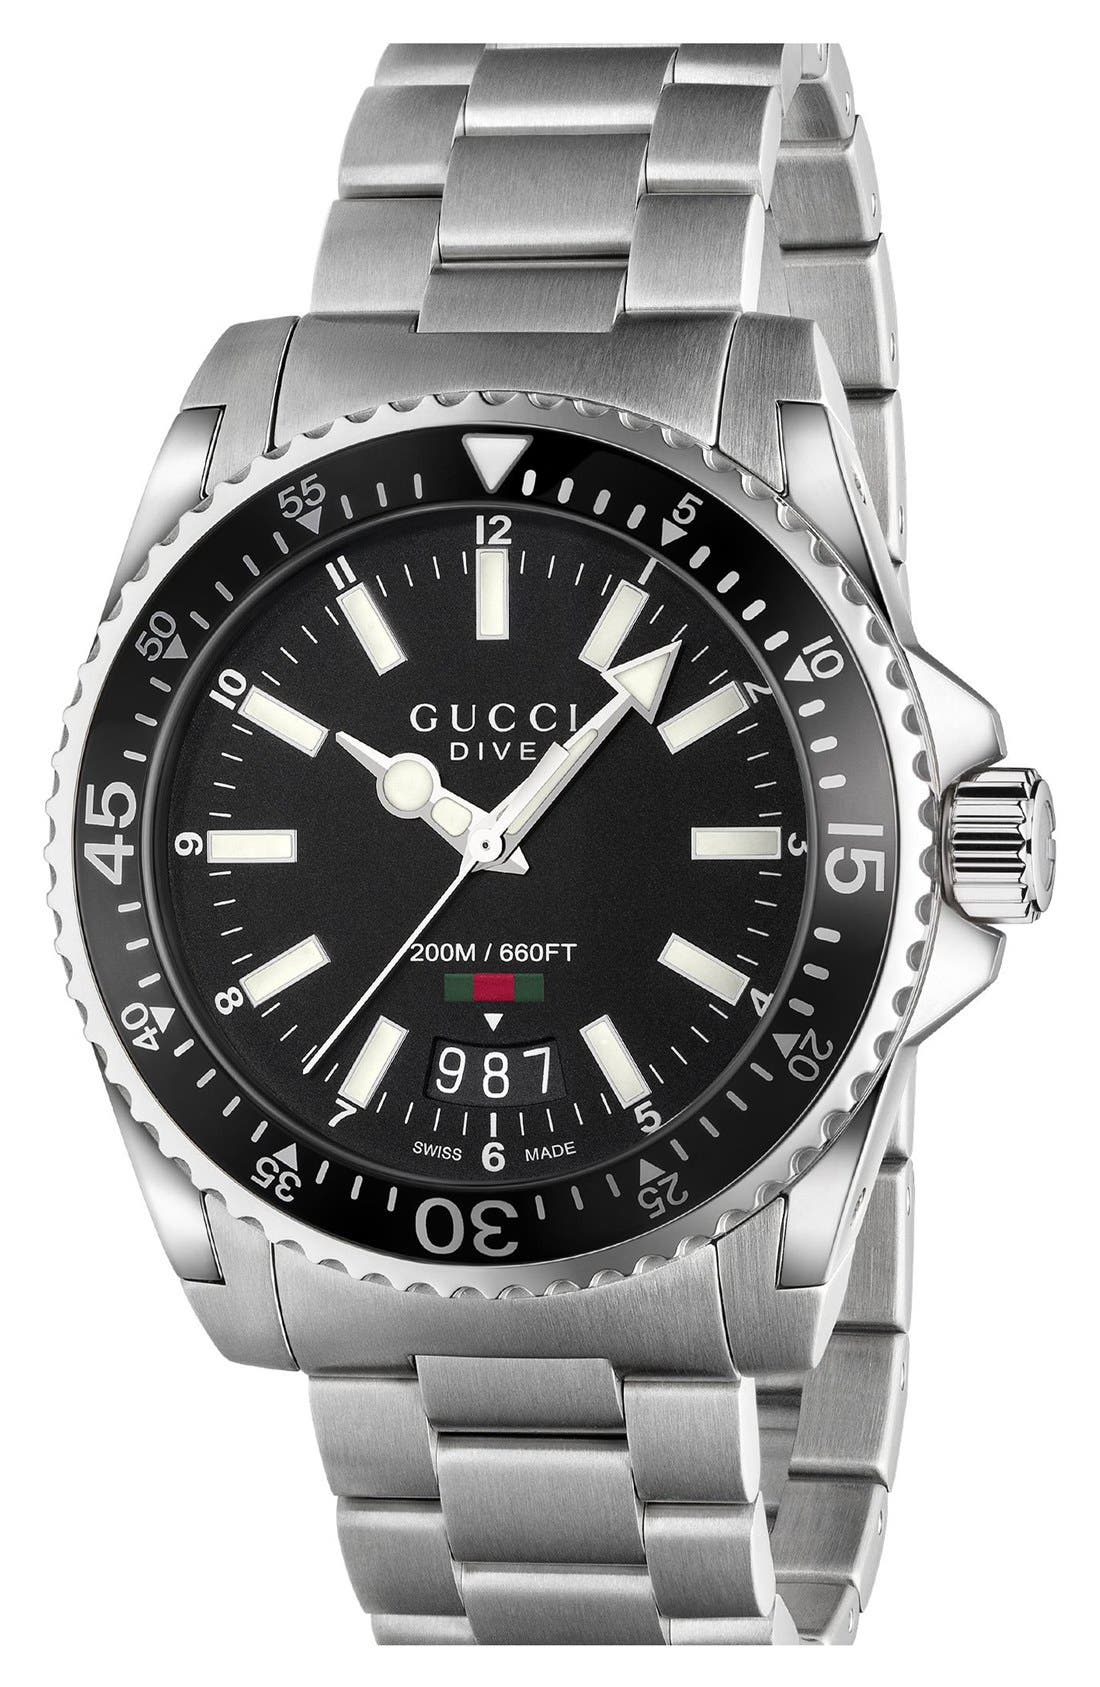 gucci diving watch